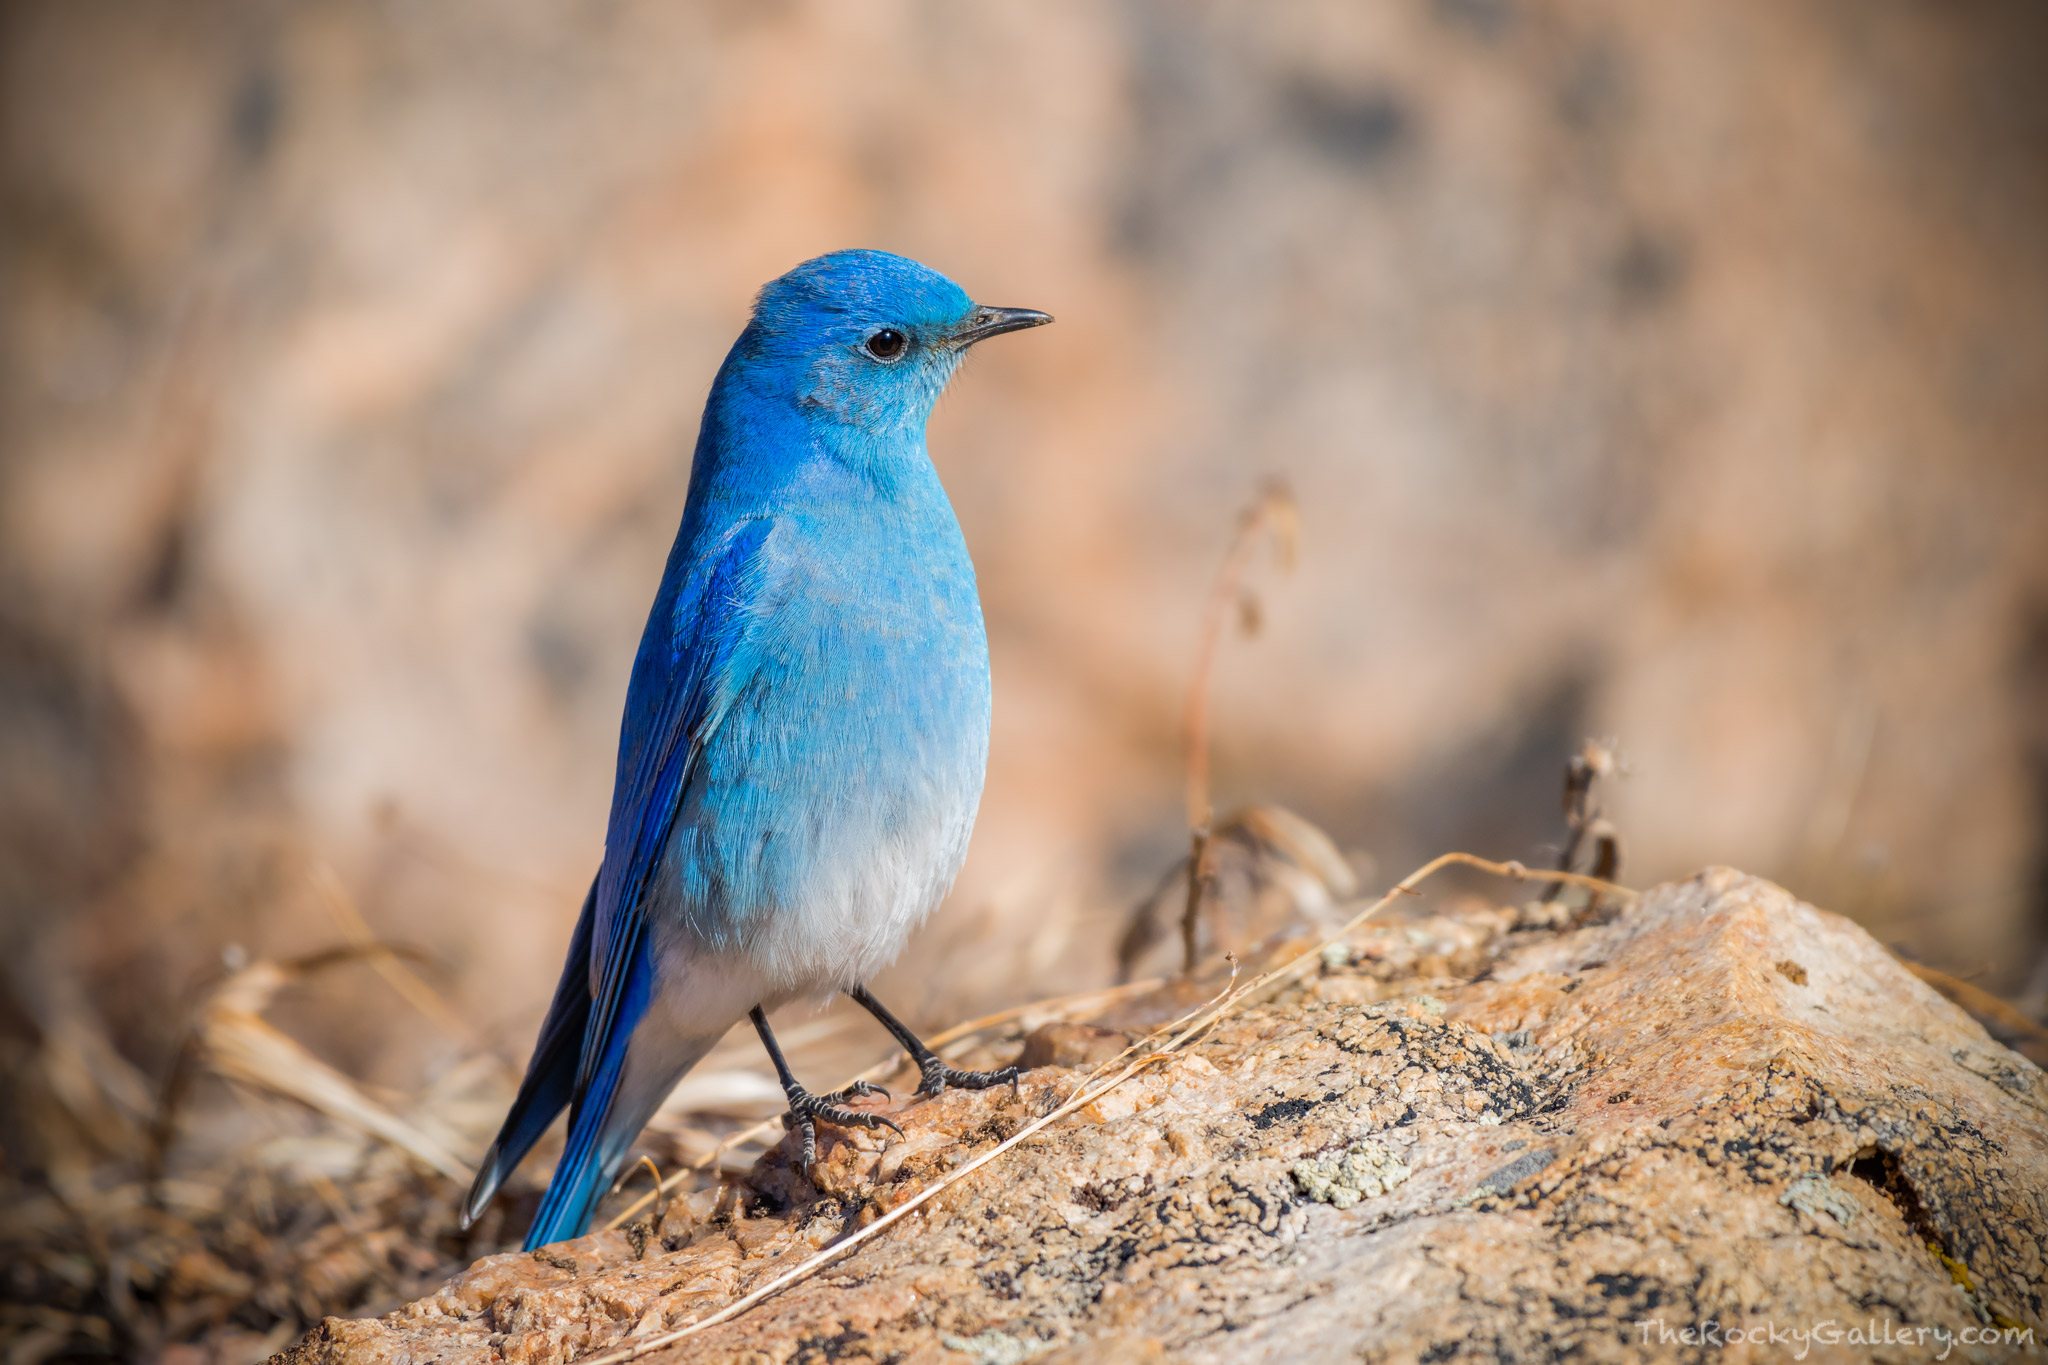 A sure sign that winter is starting to release it's long grip on Rocky Mountain National Park is the return of the Mountain Bluebird...